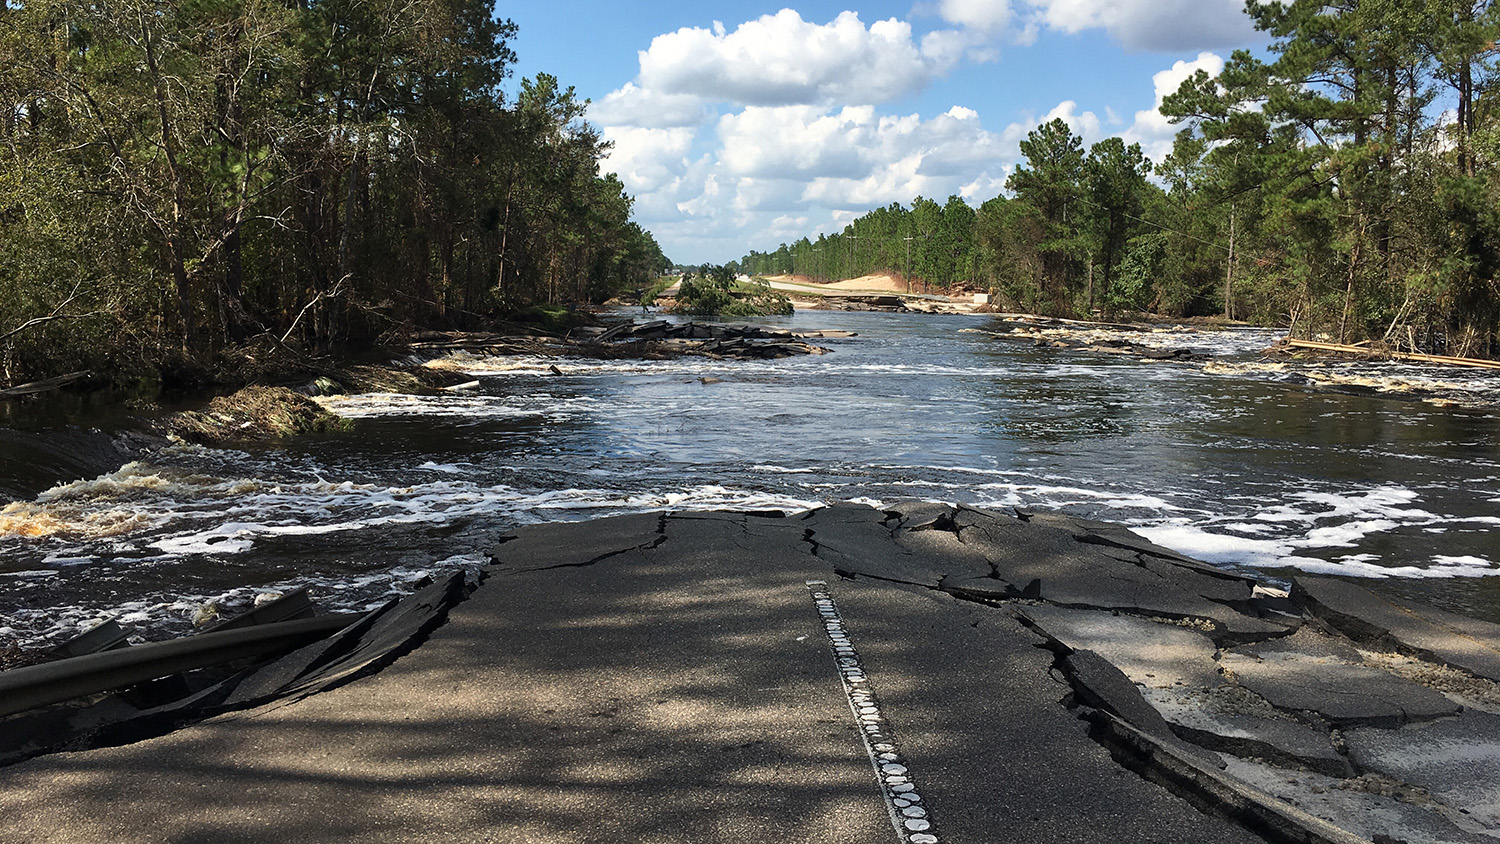 A cracked highway disappears into flood waters. (Photo: Brina Montoya)